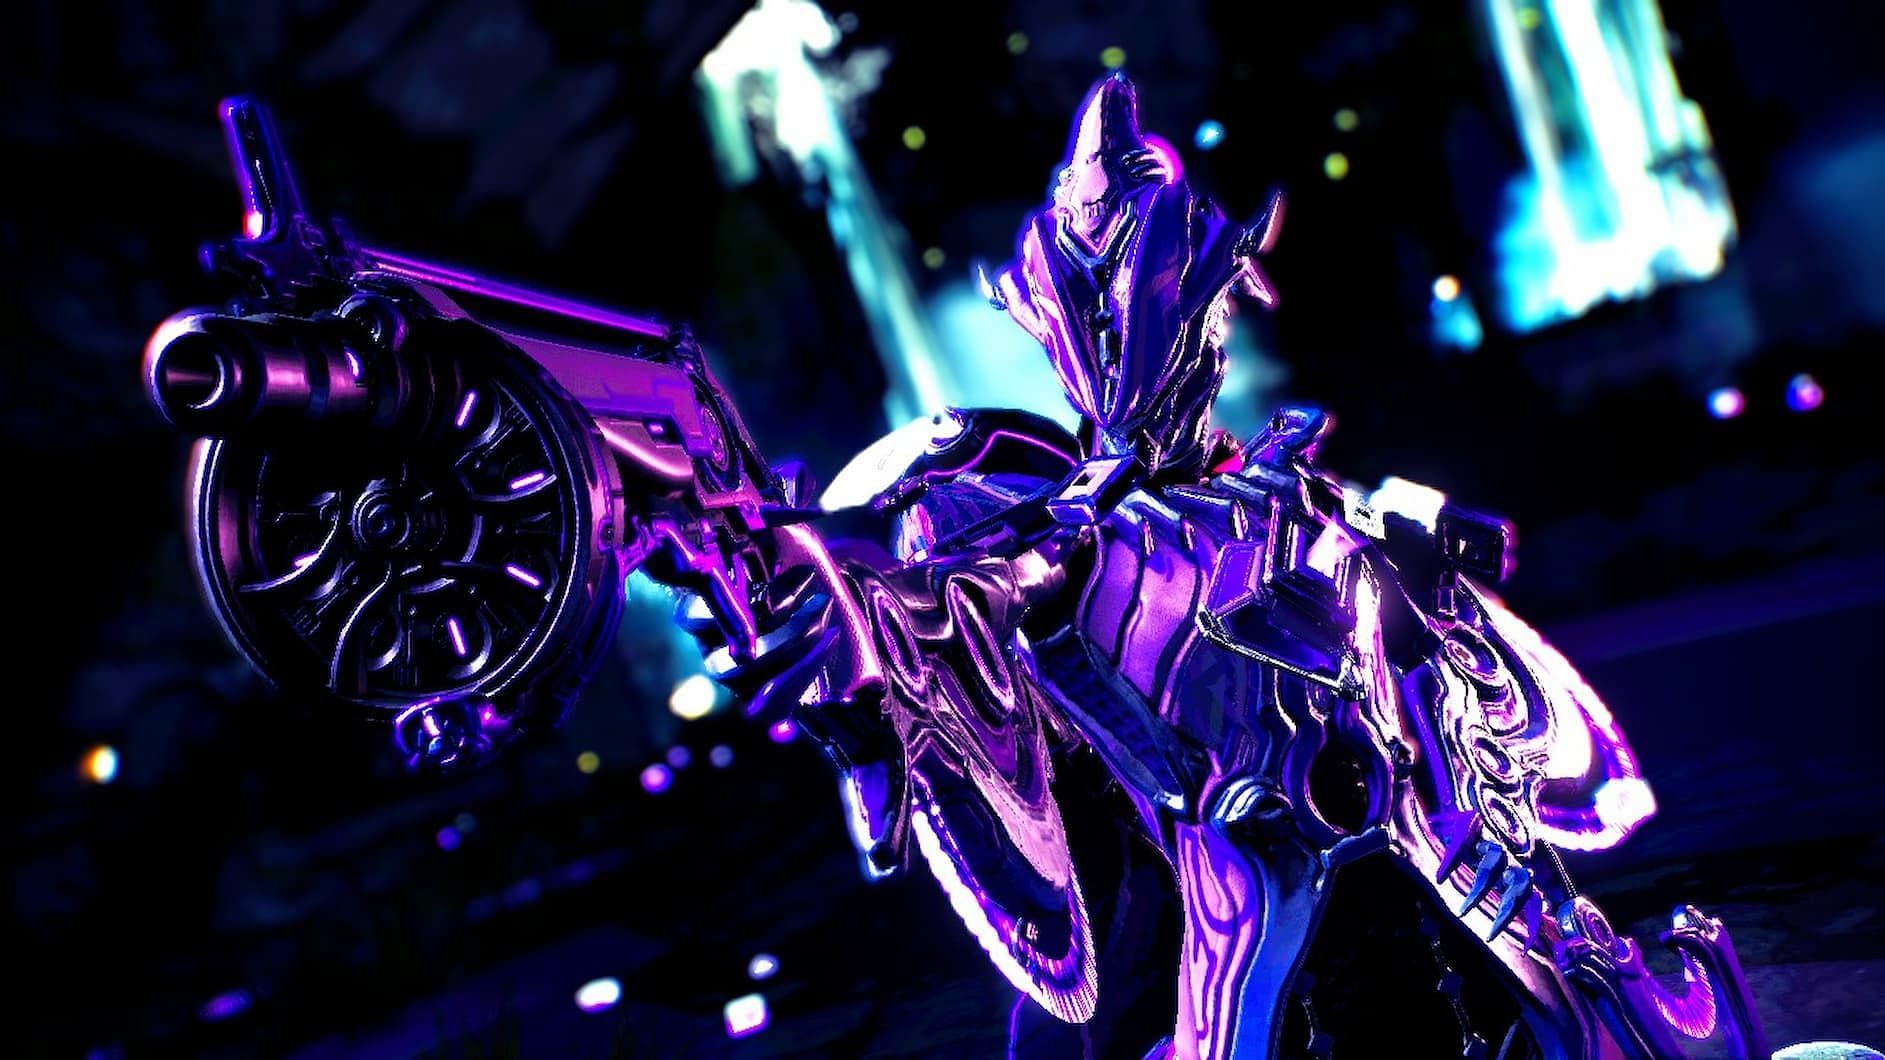 The Octavia Warframe can control enemies in a wide area near-permanently by keeping her abilities up (Image via Digital Extremes)